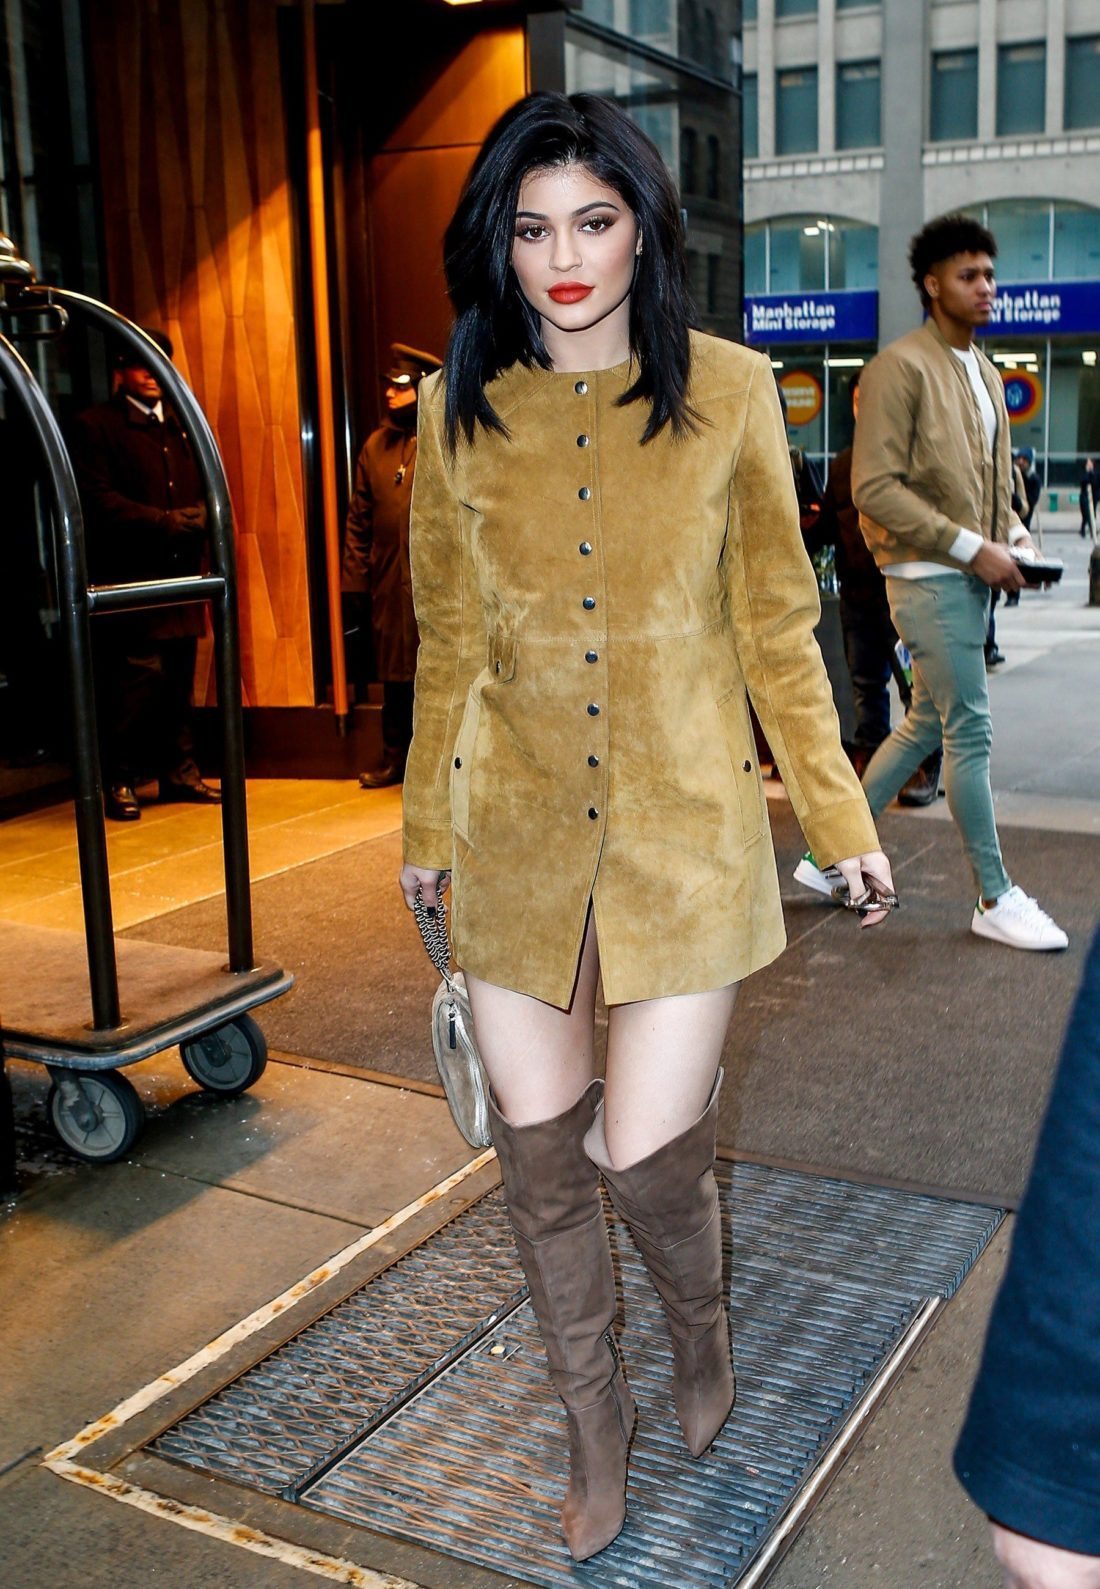 Kylie Jenner's outfits suede